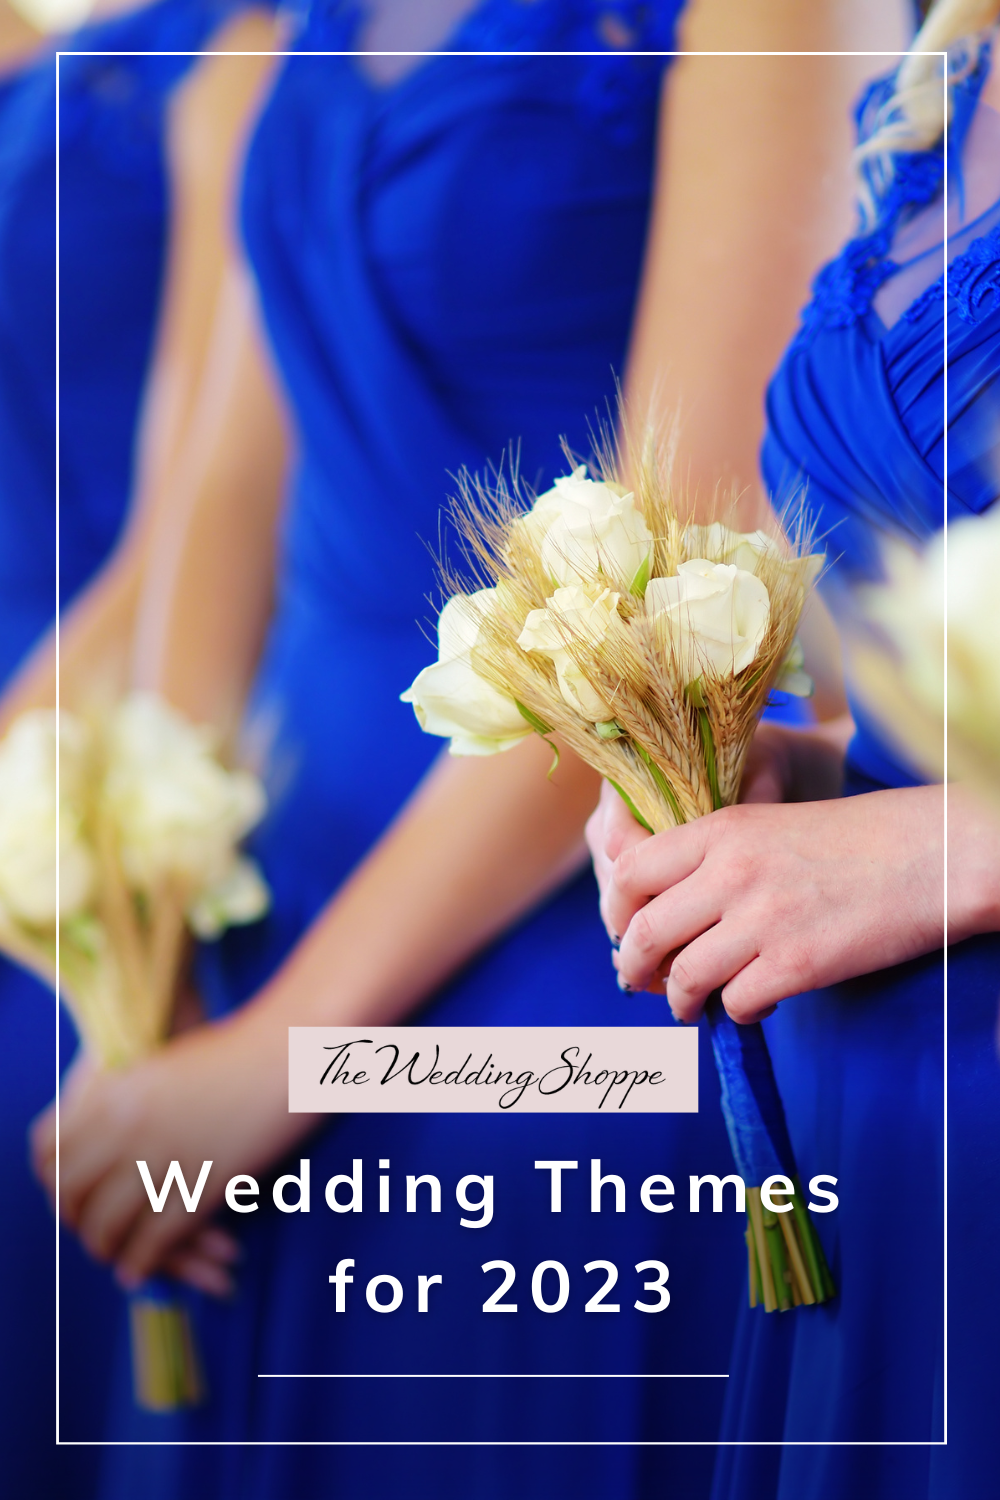 blog post graphic for "Wedding Themes for 2023" from the Wedding Shoppe